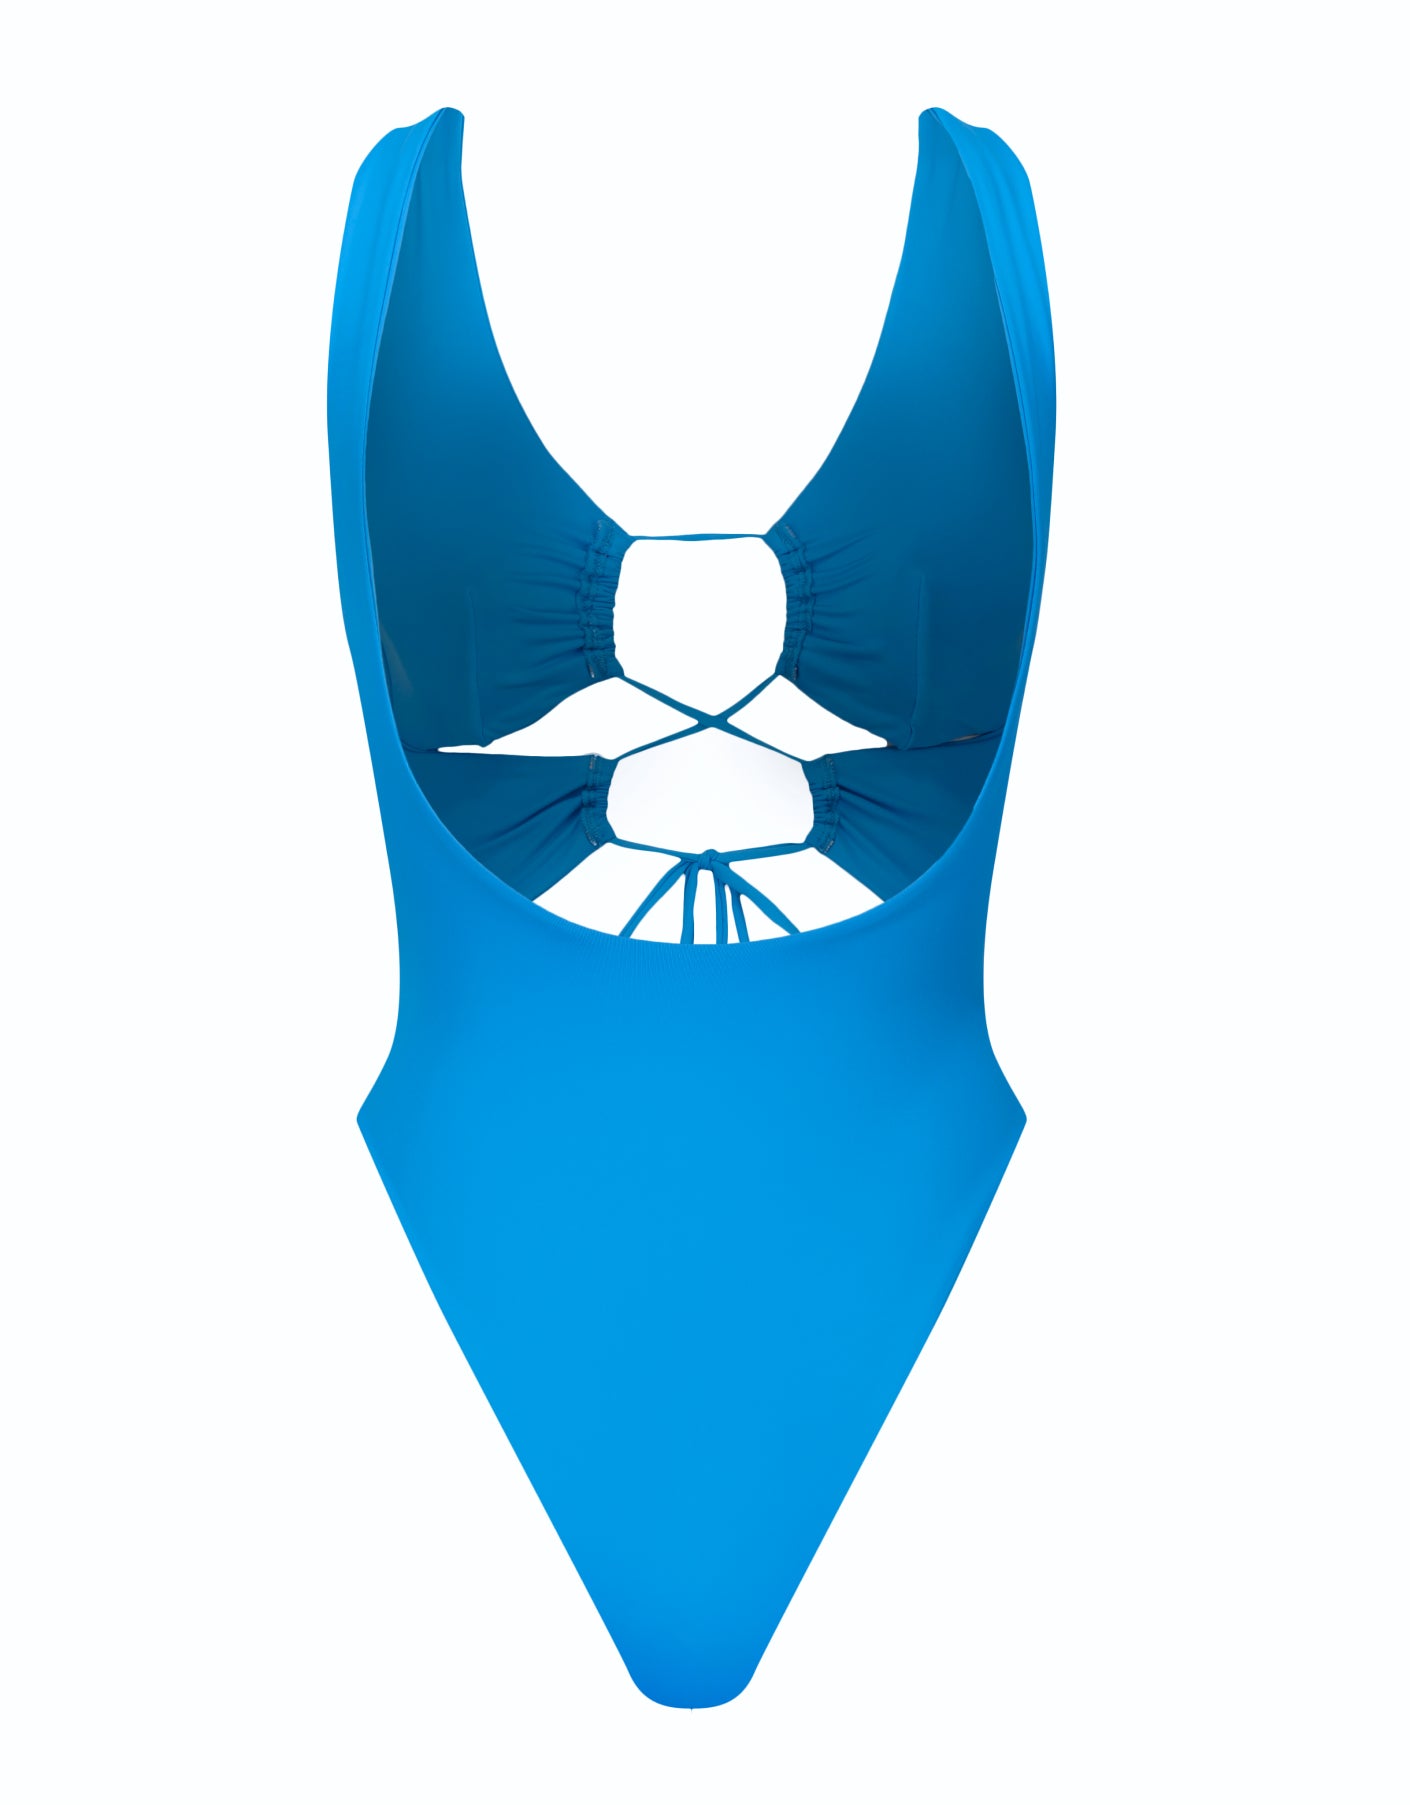 Carib Tie Front Cut Out One Piece // Cobalt Bright Blue